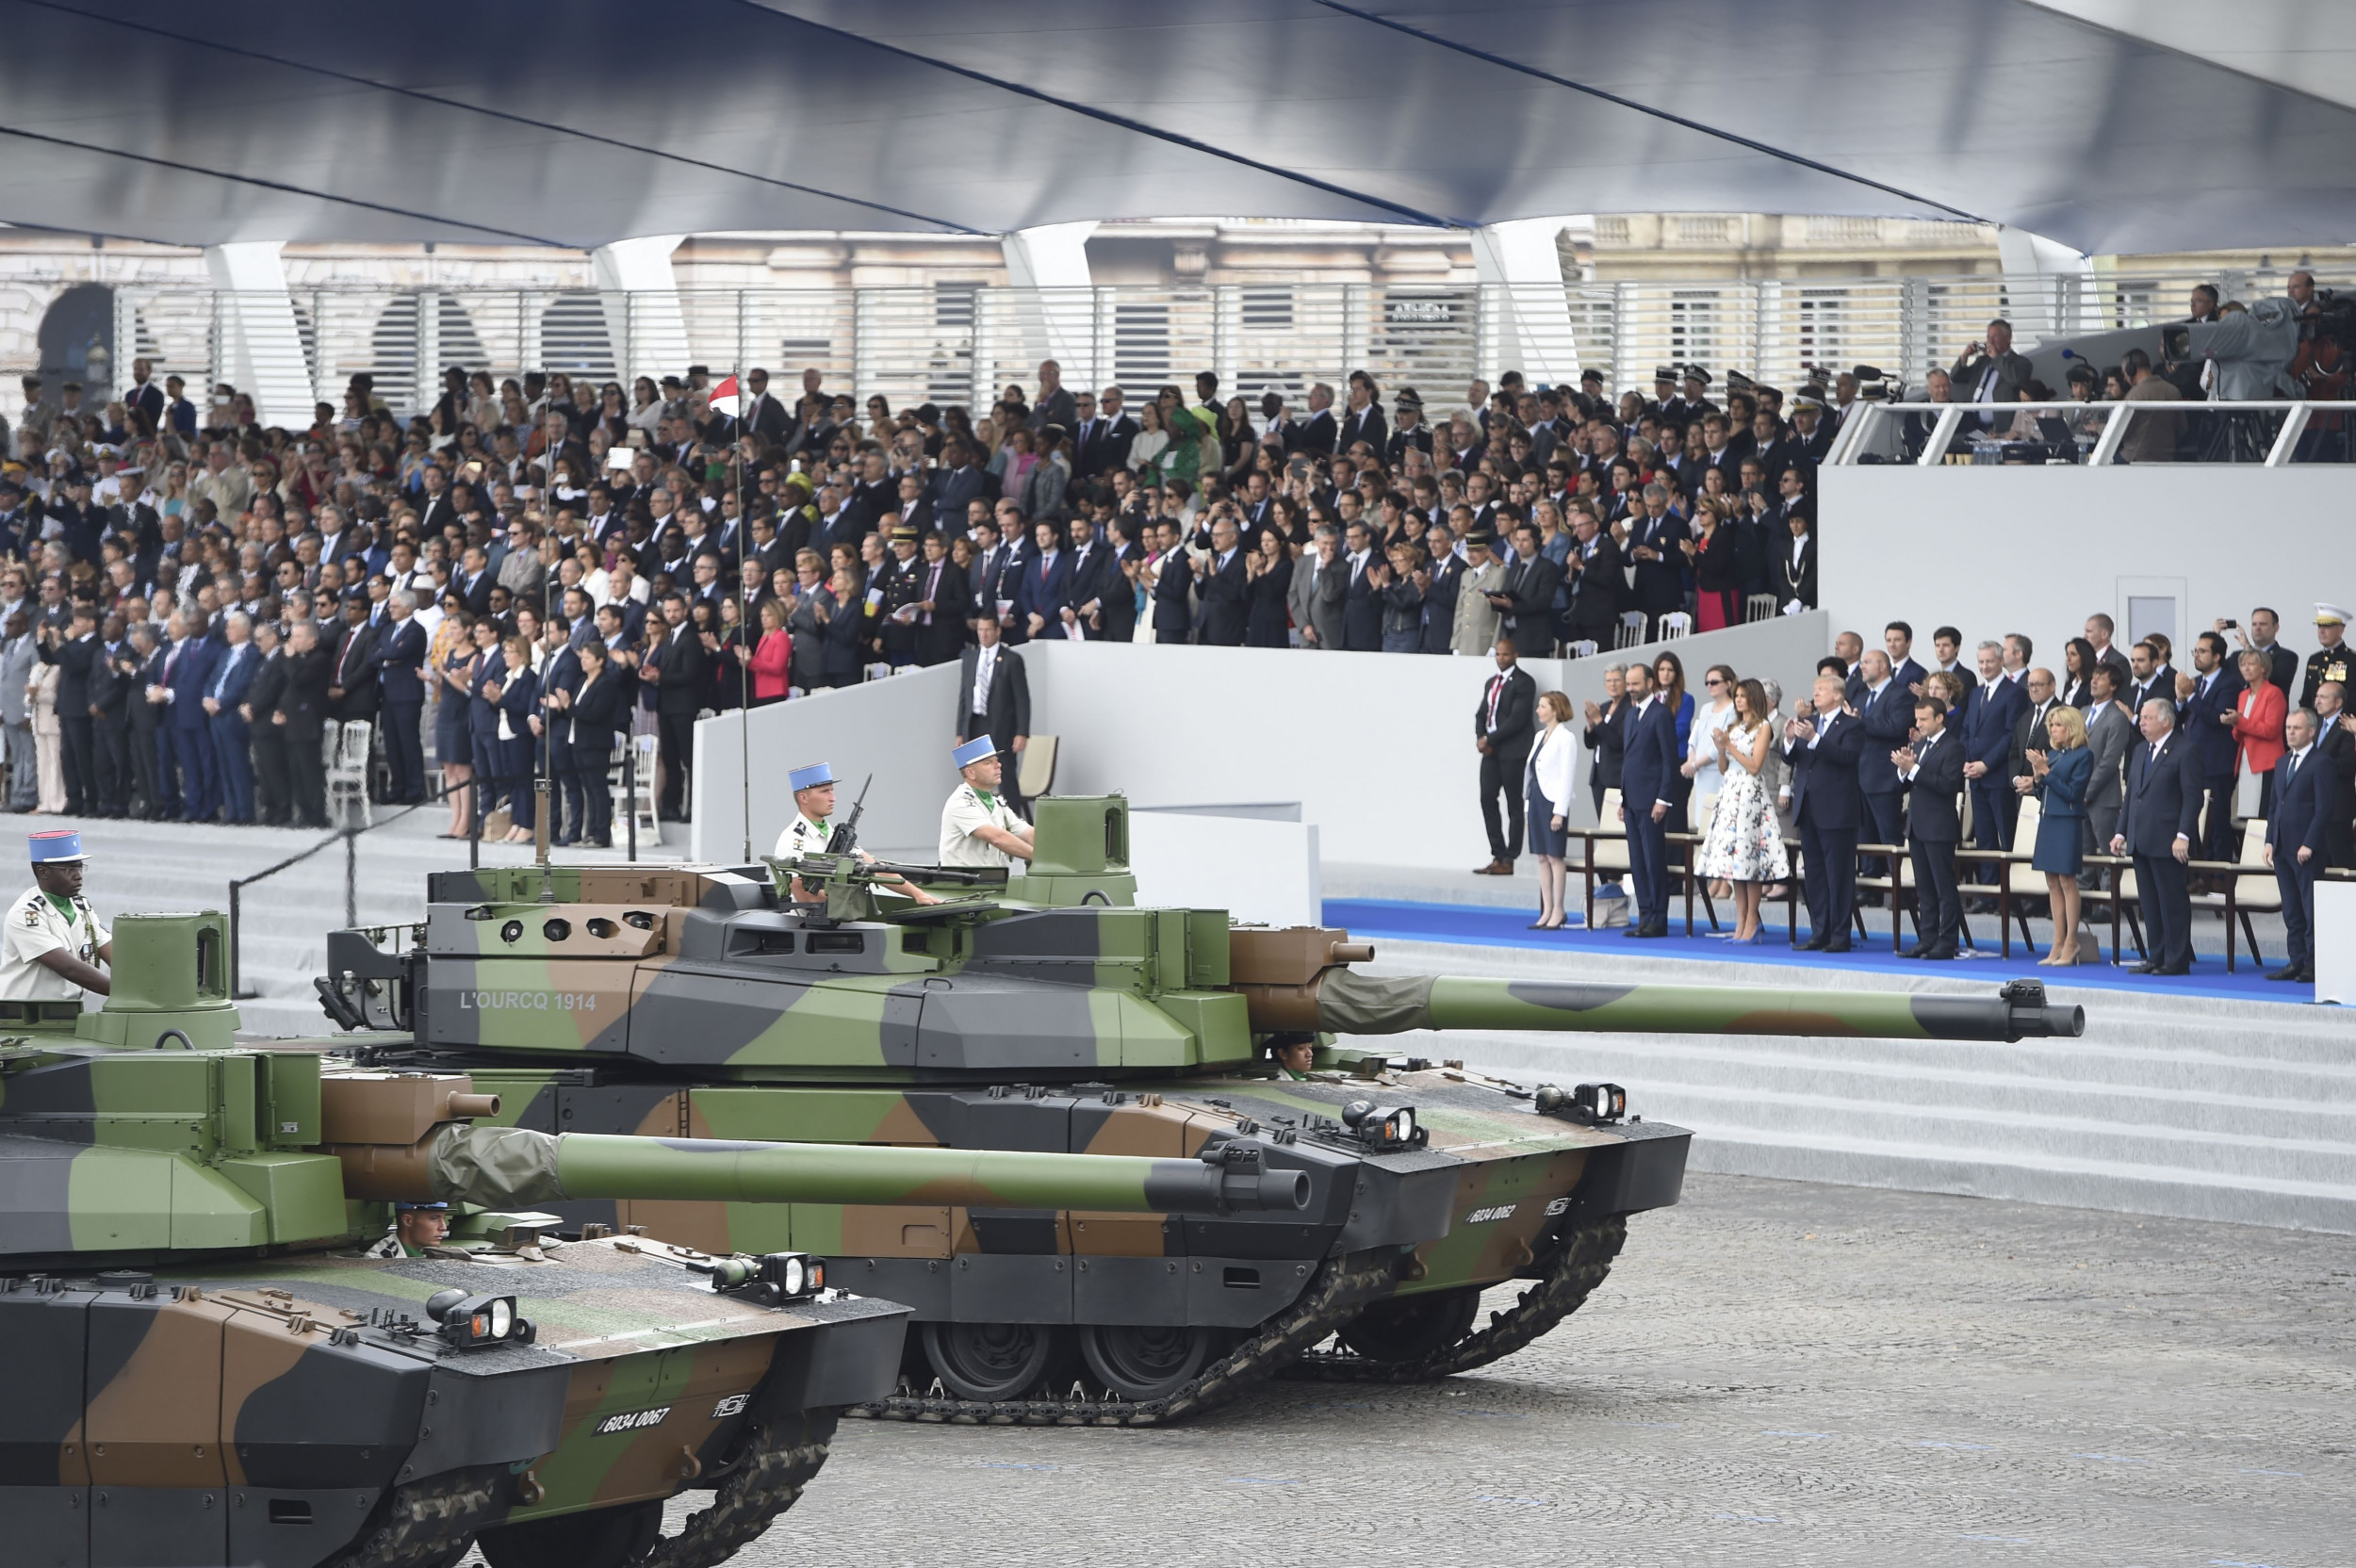 haa the us ever had a parade with military tanks in it